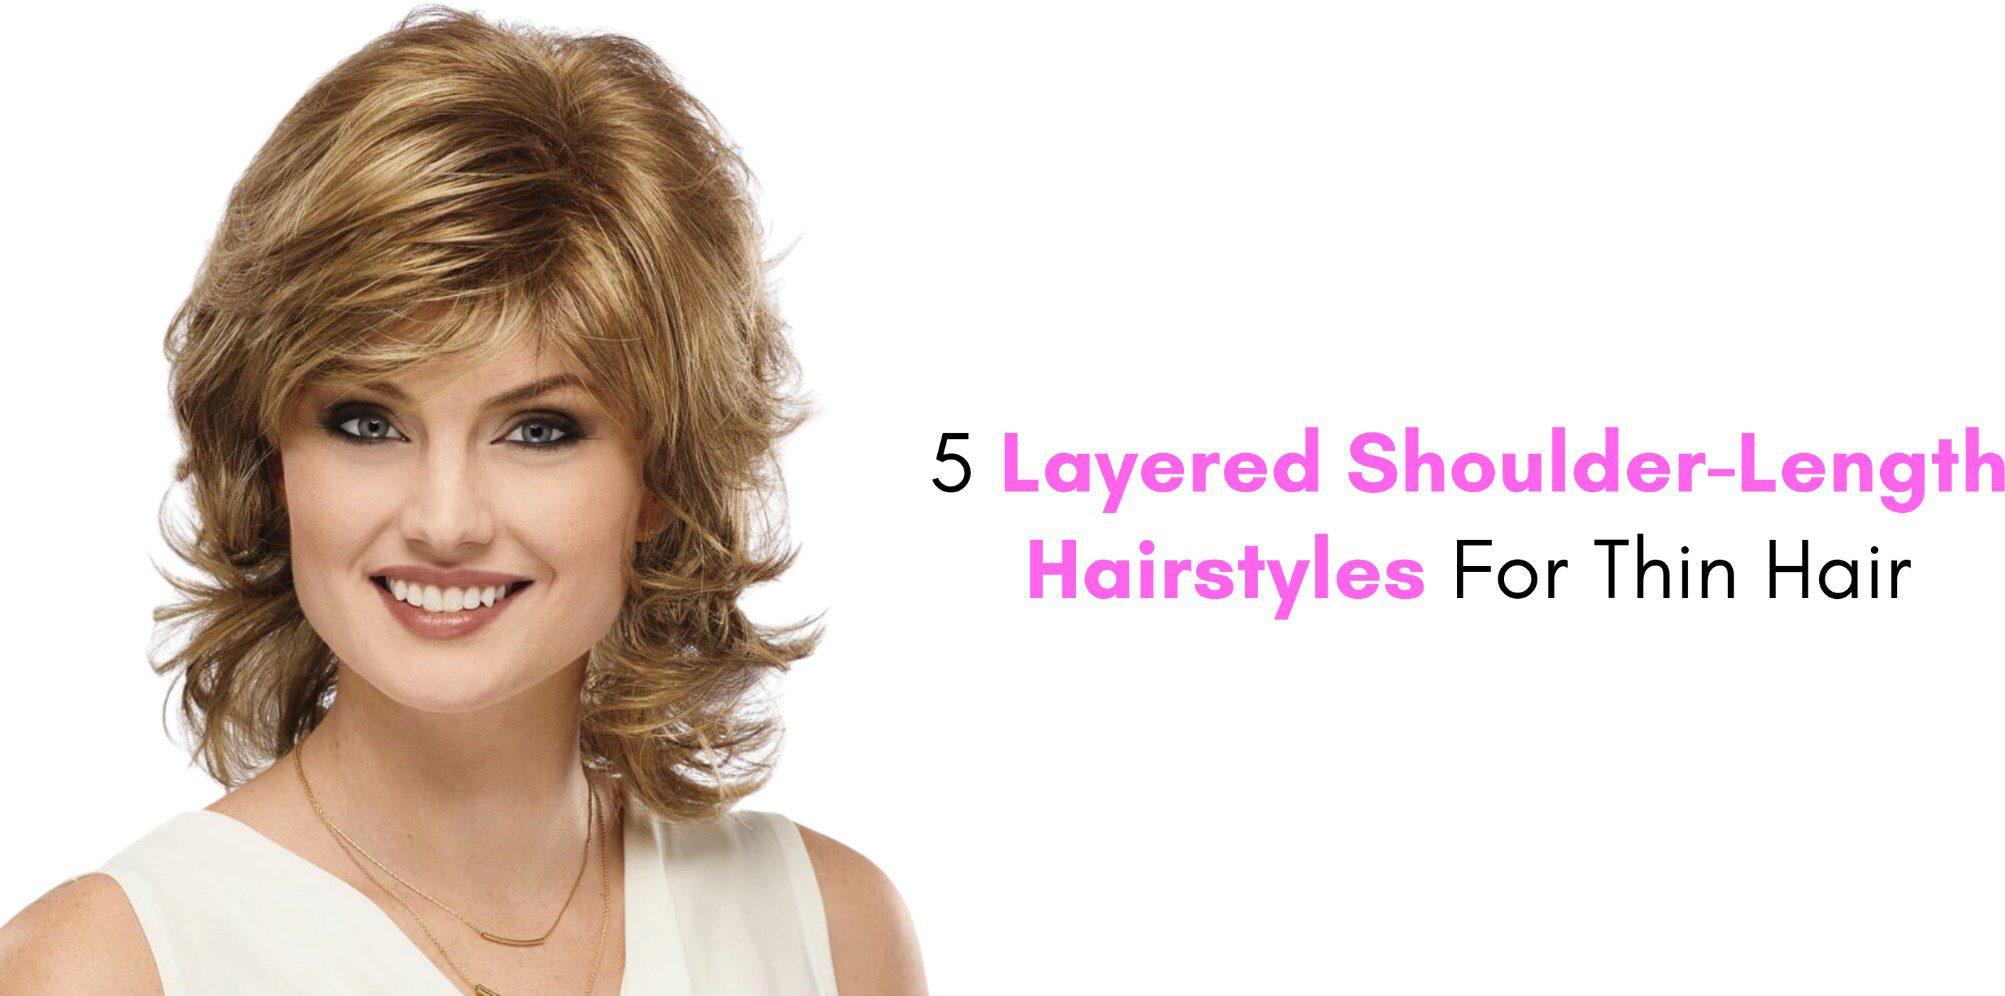 Top 48 image thin hair shoulder length hairstyles 